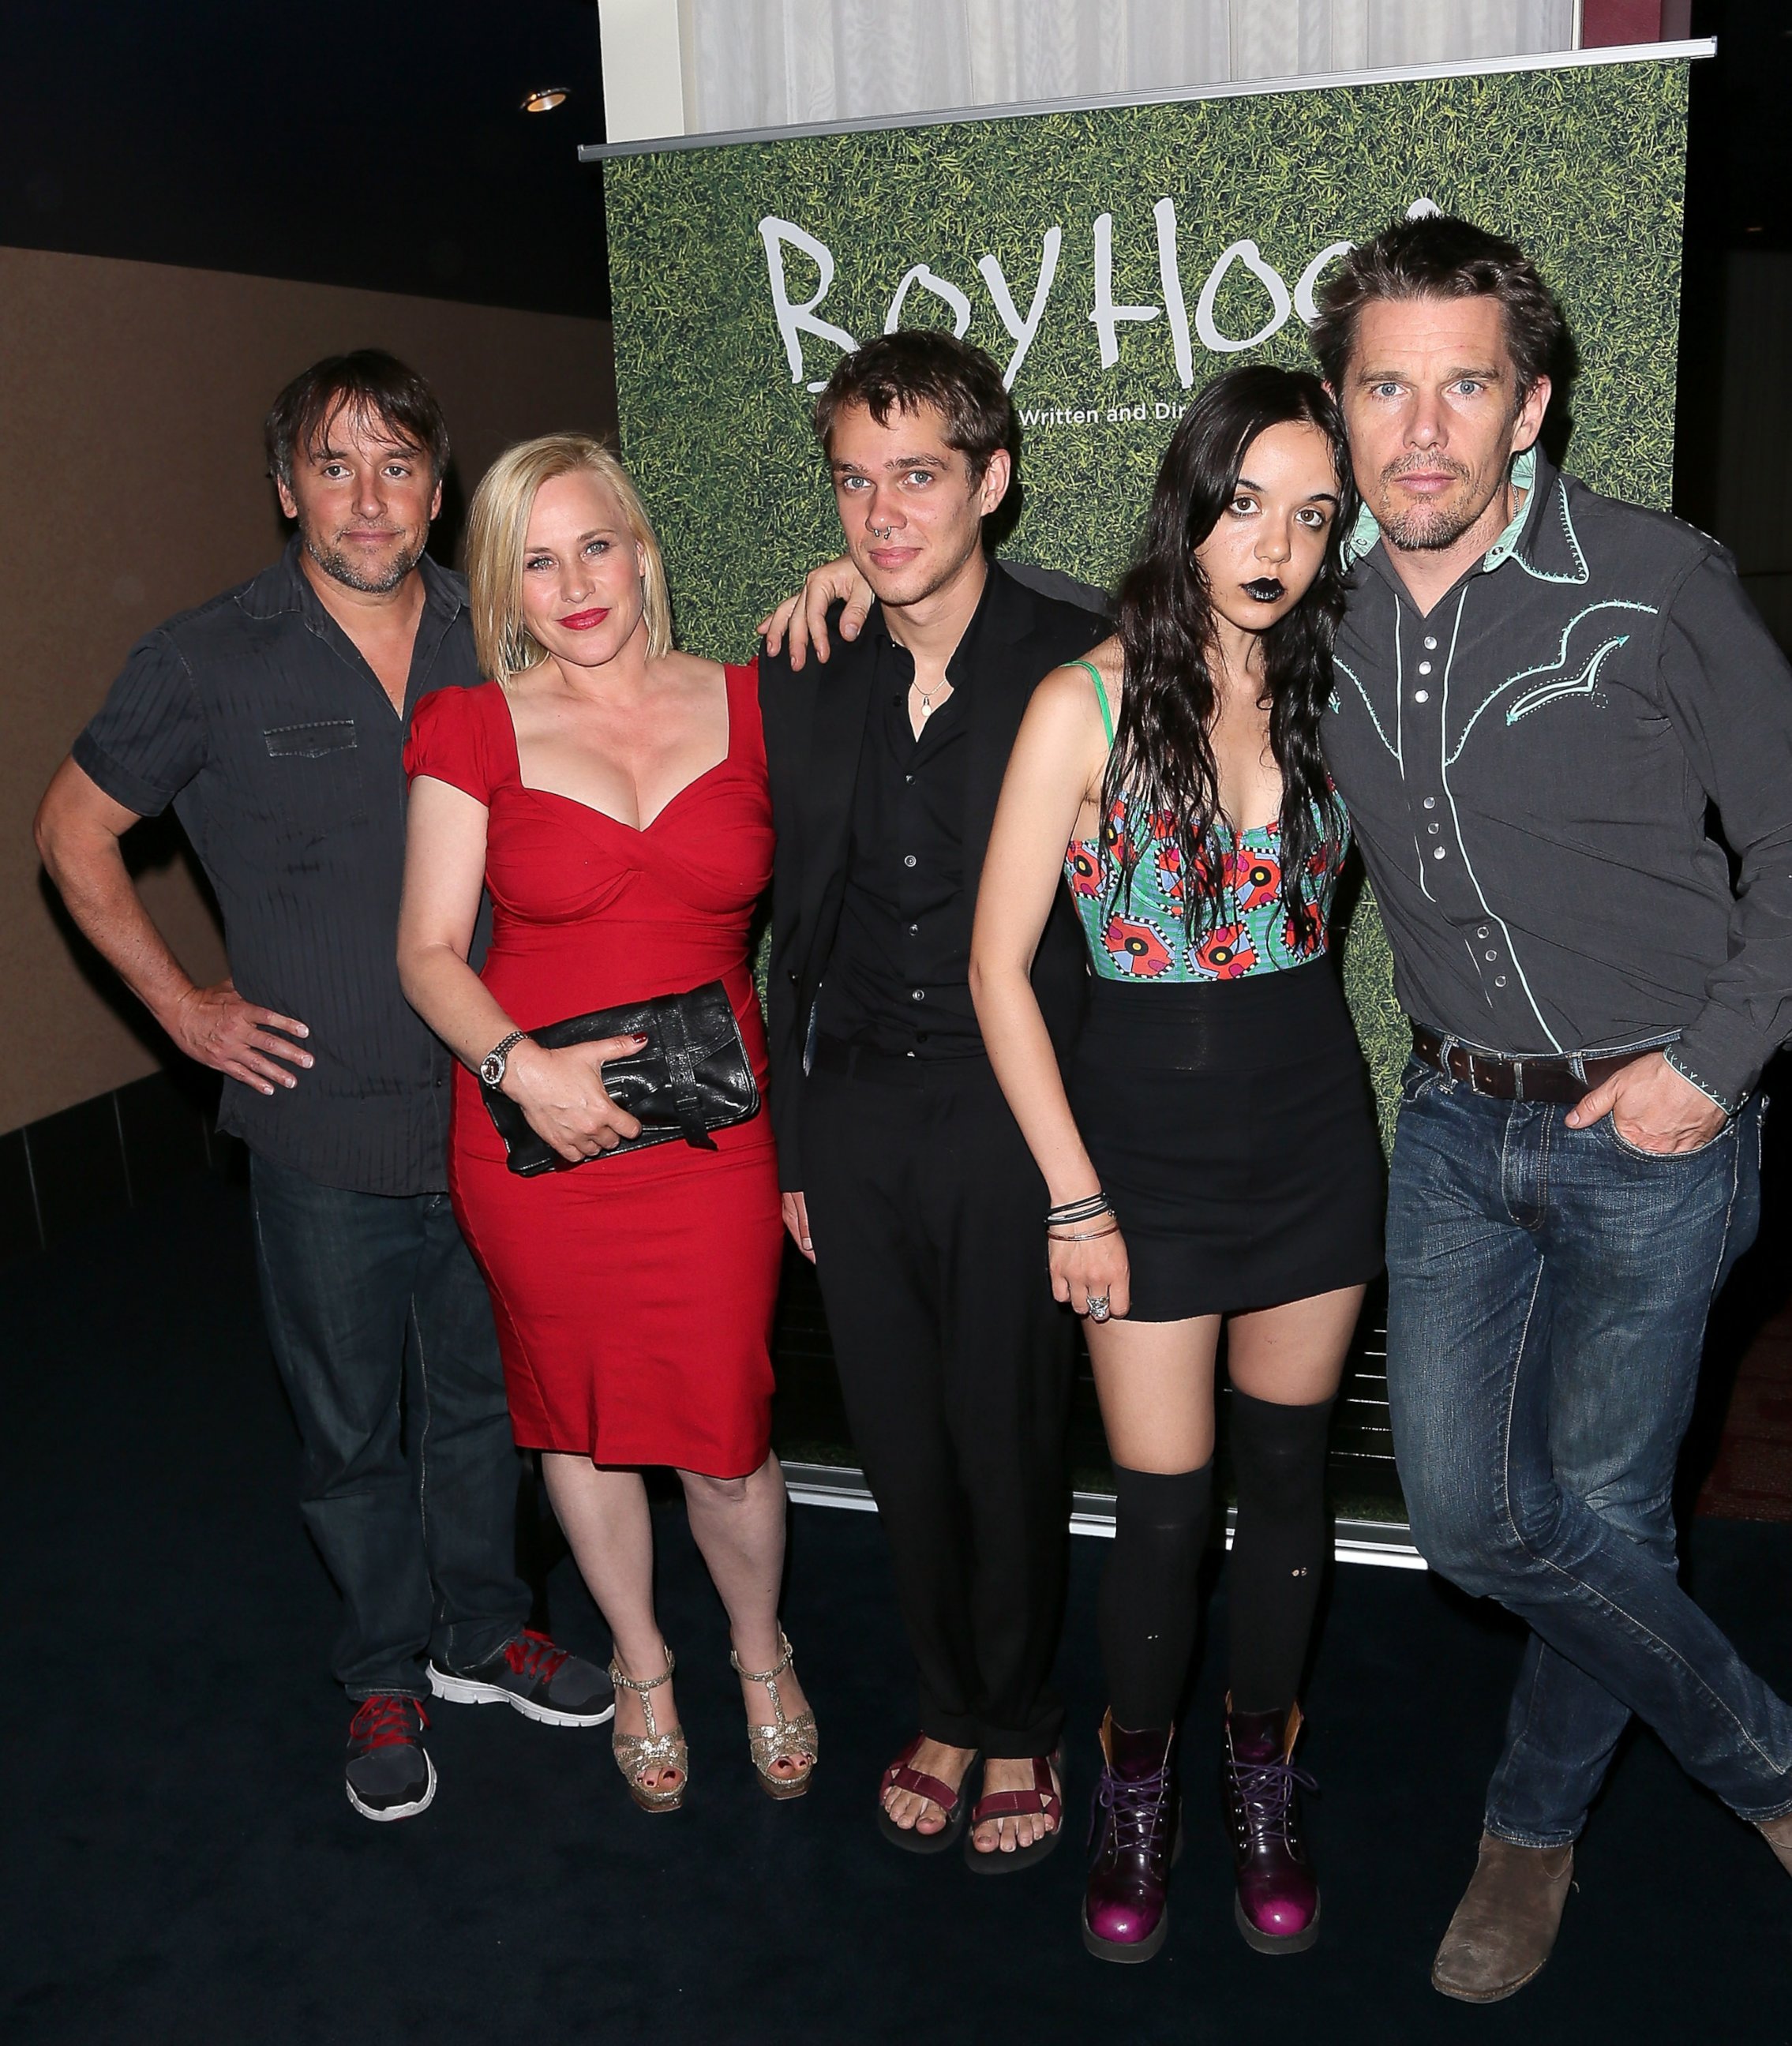 PHOTO: Director Richard Linklater and actors Patricia Arquette, Ellar Coltrane, Lorelei Linklater and Ethan Hawke attend a screening of IFC Films' "Boyhood" at ArcLight Hollywood on June 16, 2014 in Hollywood, California.